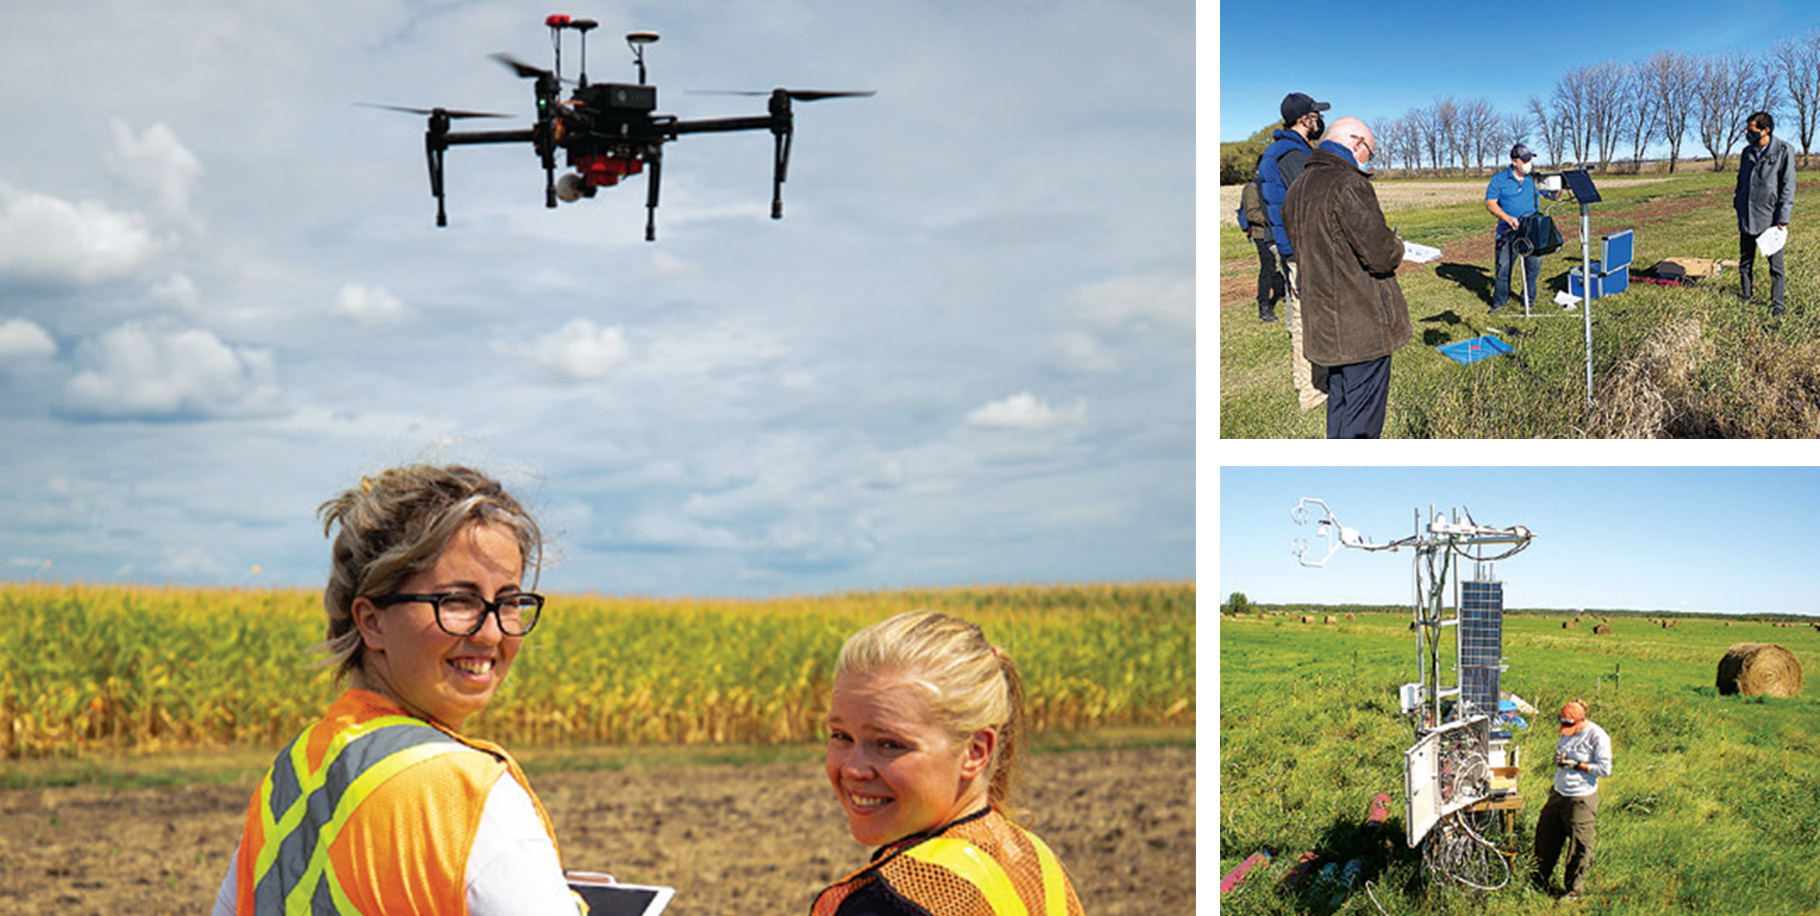 A collage of three photos of two young women operating a drone in a field, farmers surrounding sensing equipment, and a man next to a large piece of equipment in a hay field.